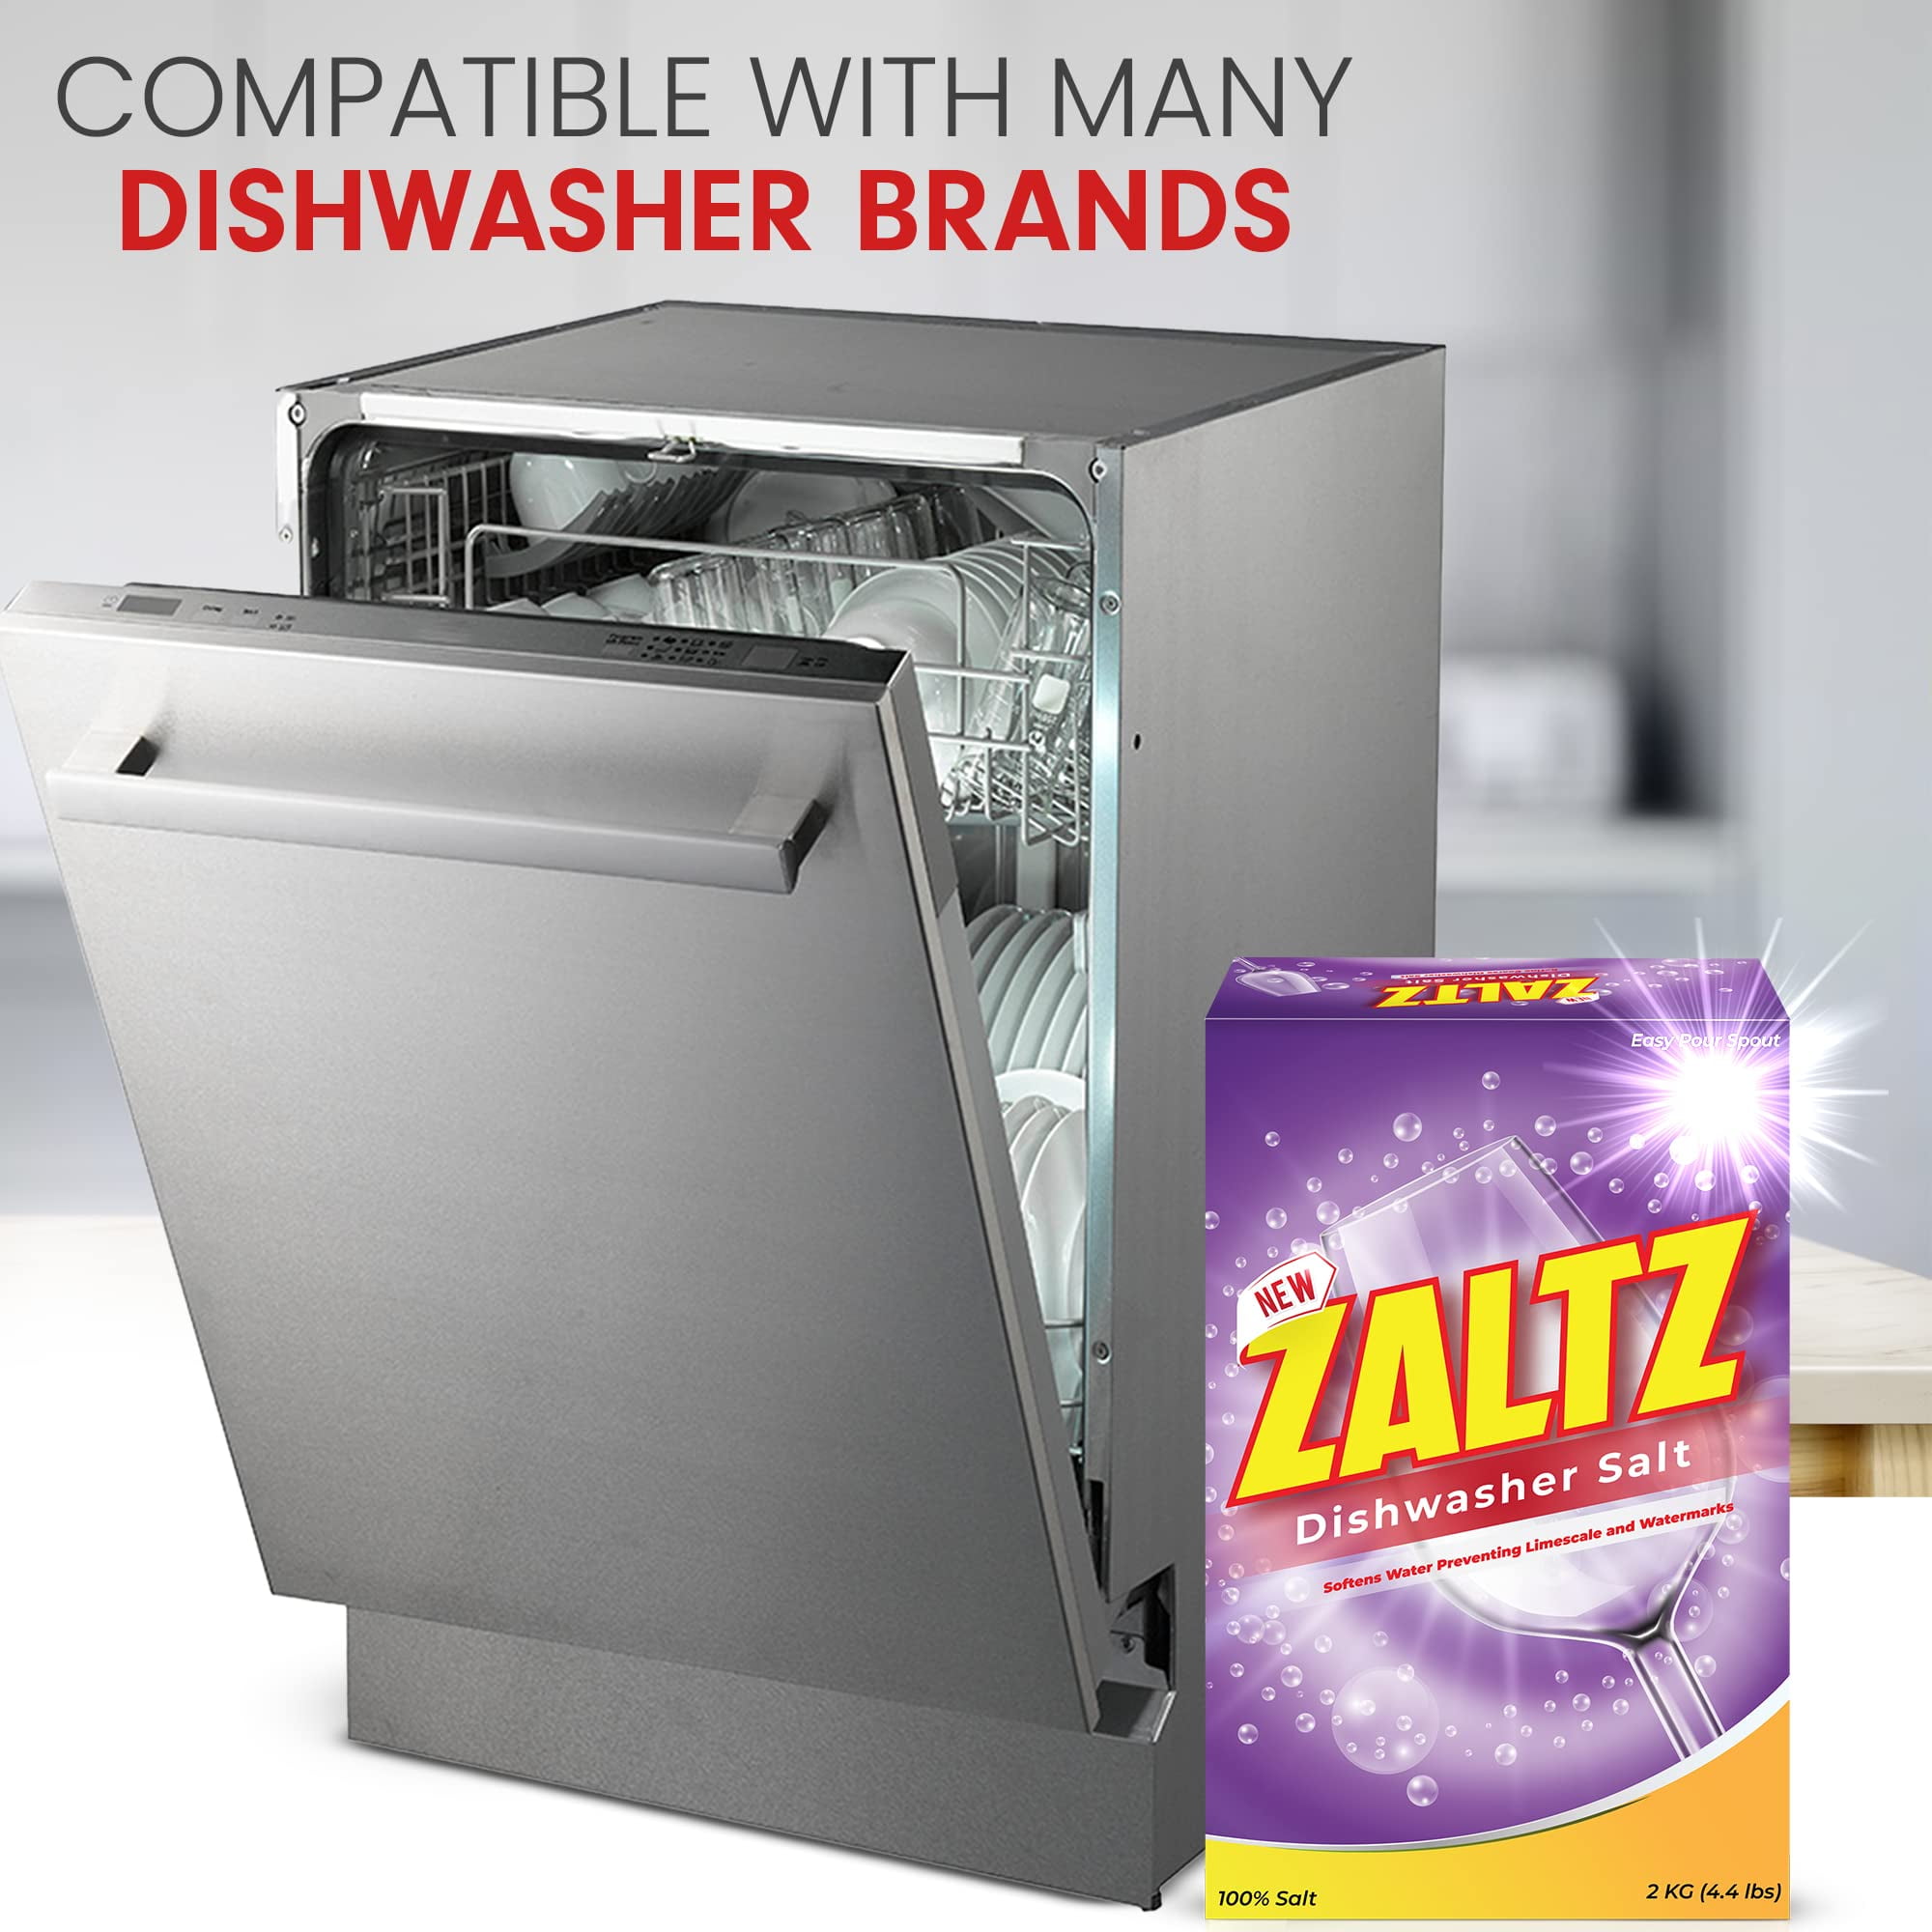 How to add salt and rinse aid to your dishwasher + what they do and why  they're important 